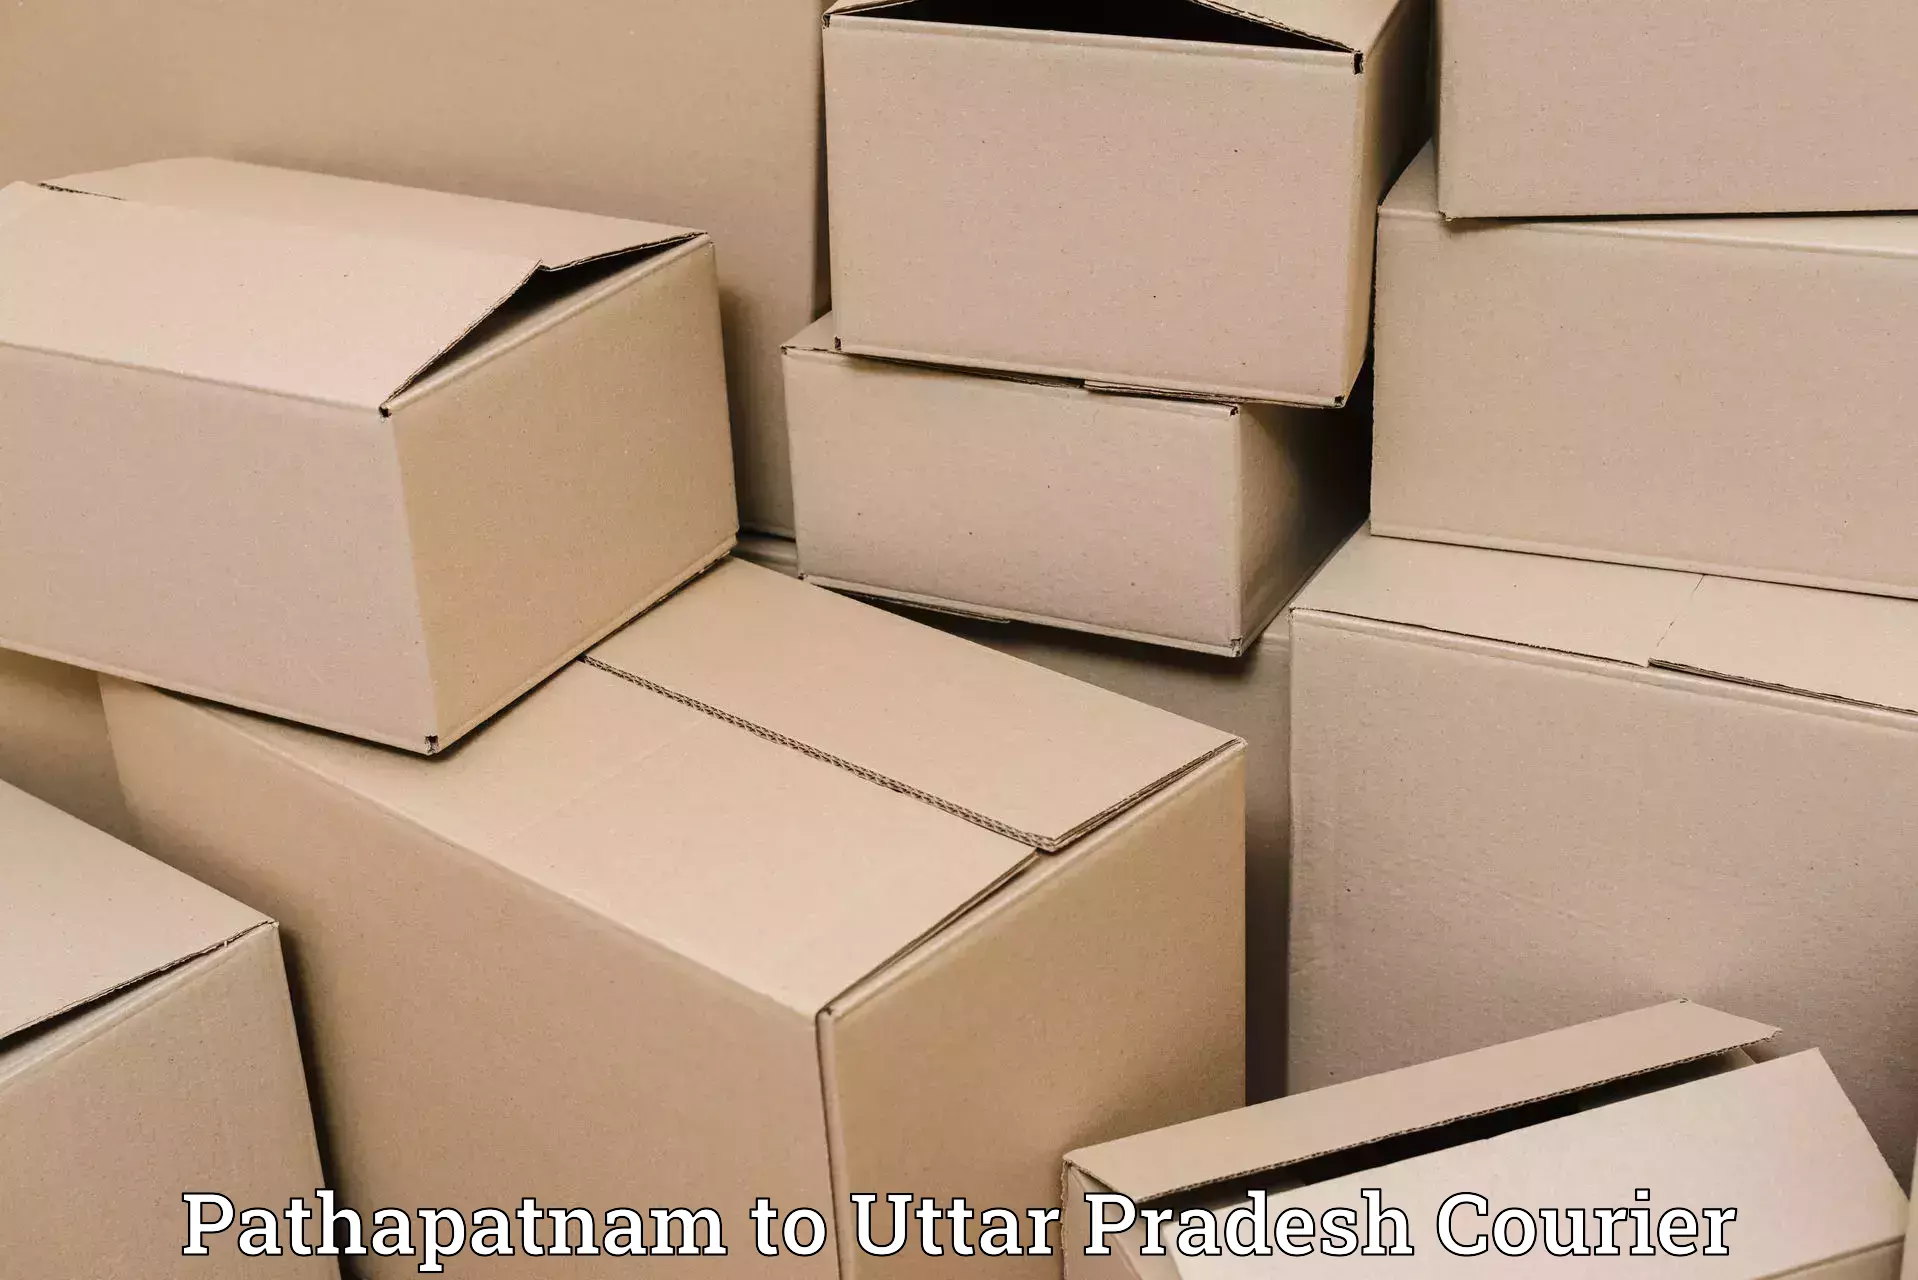 Express postal services in Pathapatnam to Madhuban